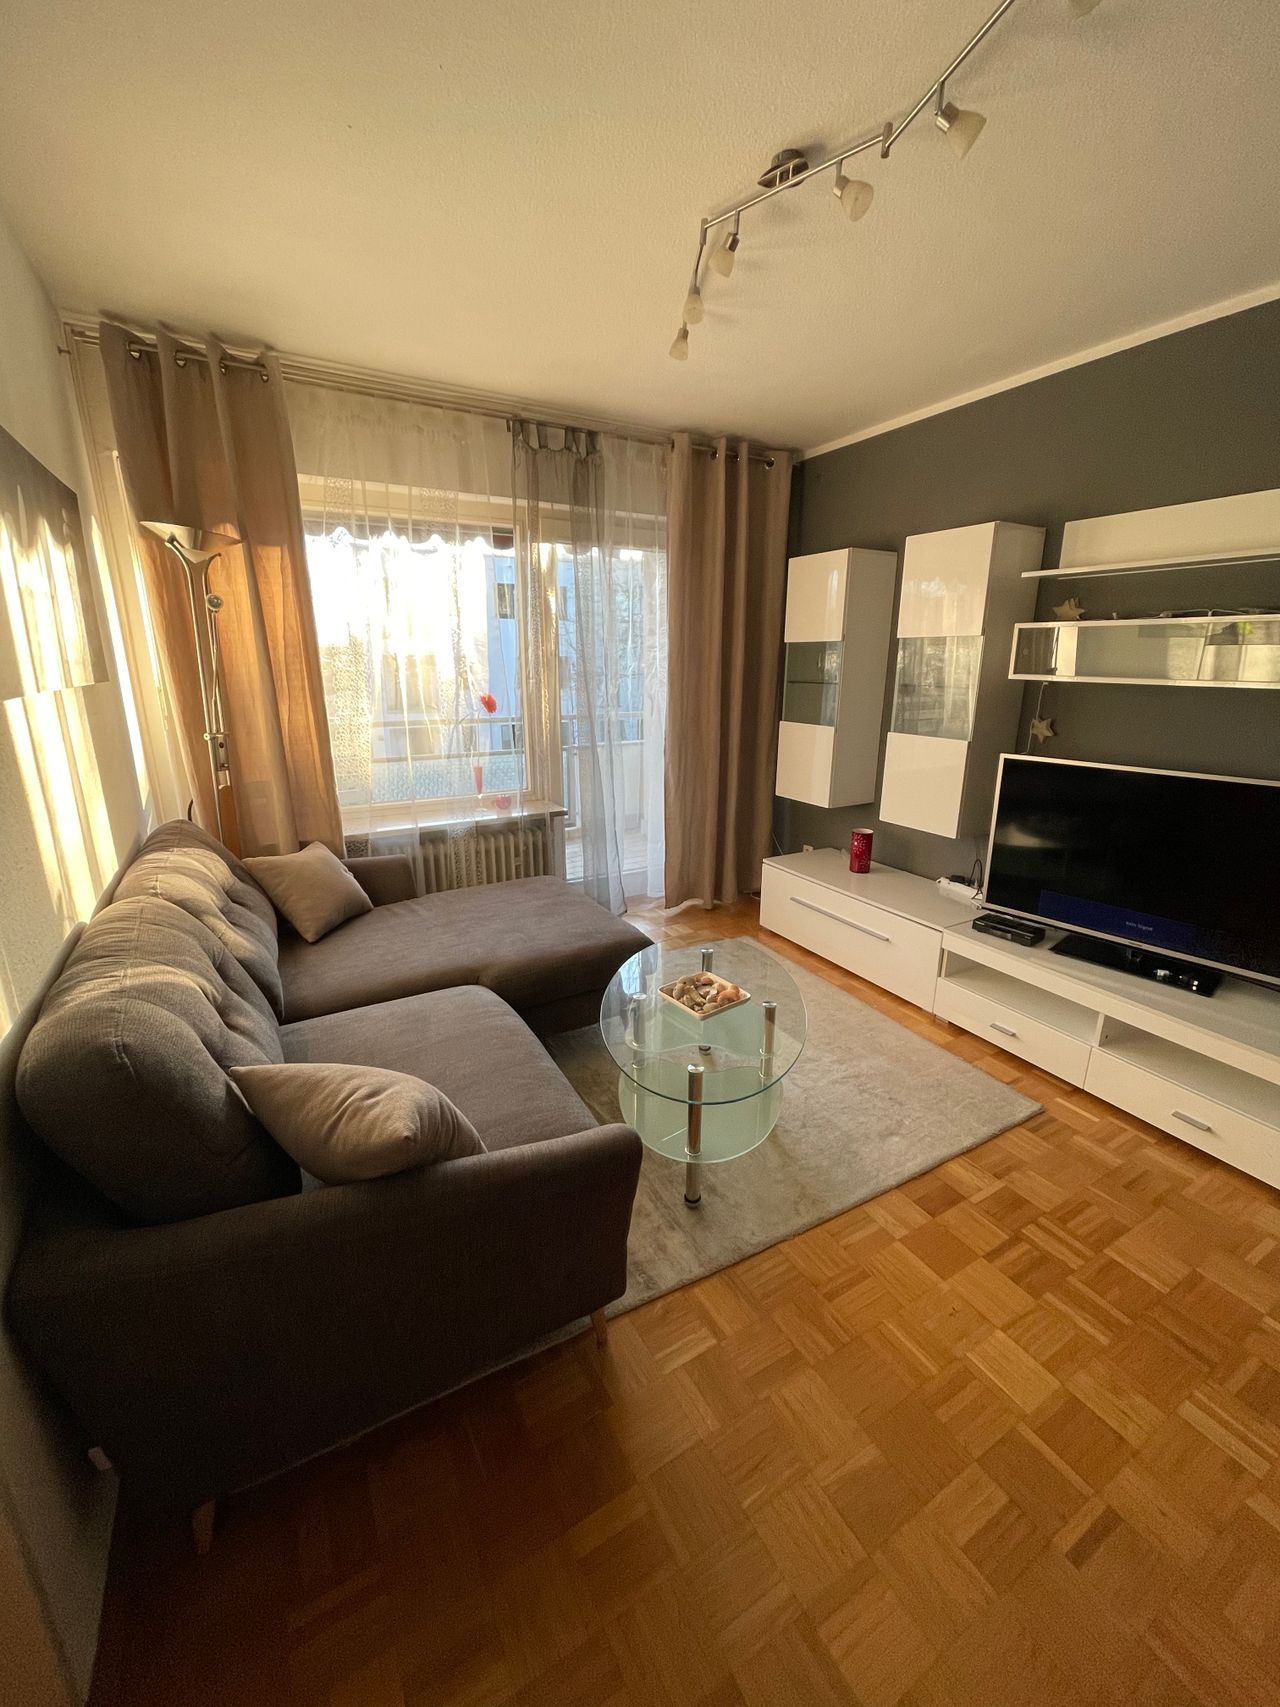 Renovated and well-kept 1.5 room apartment with balcony in Trudering